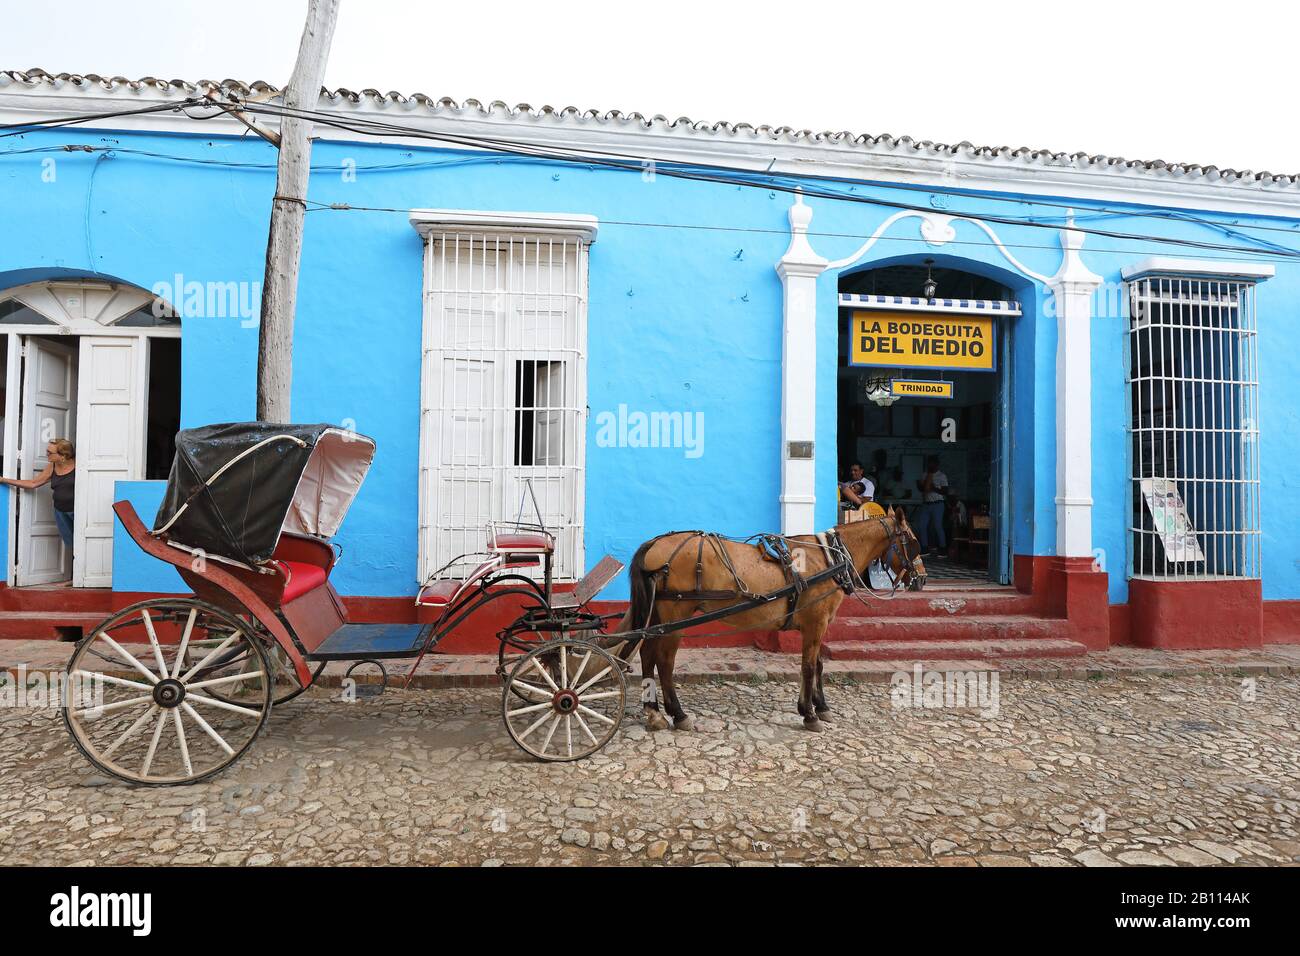 horse-drawn carriage in front of a wine bar, Cuba, Trinidad Stock Photo